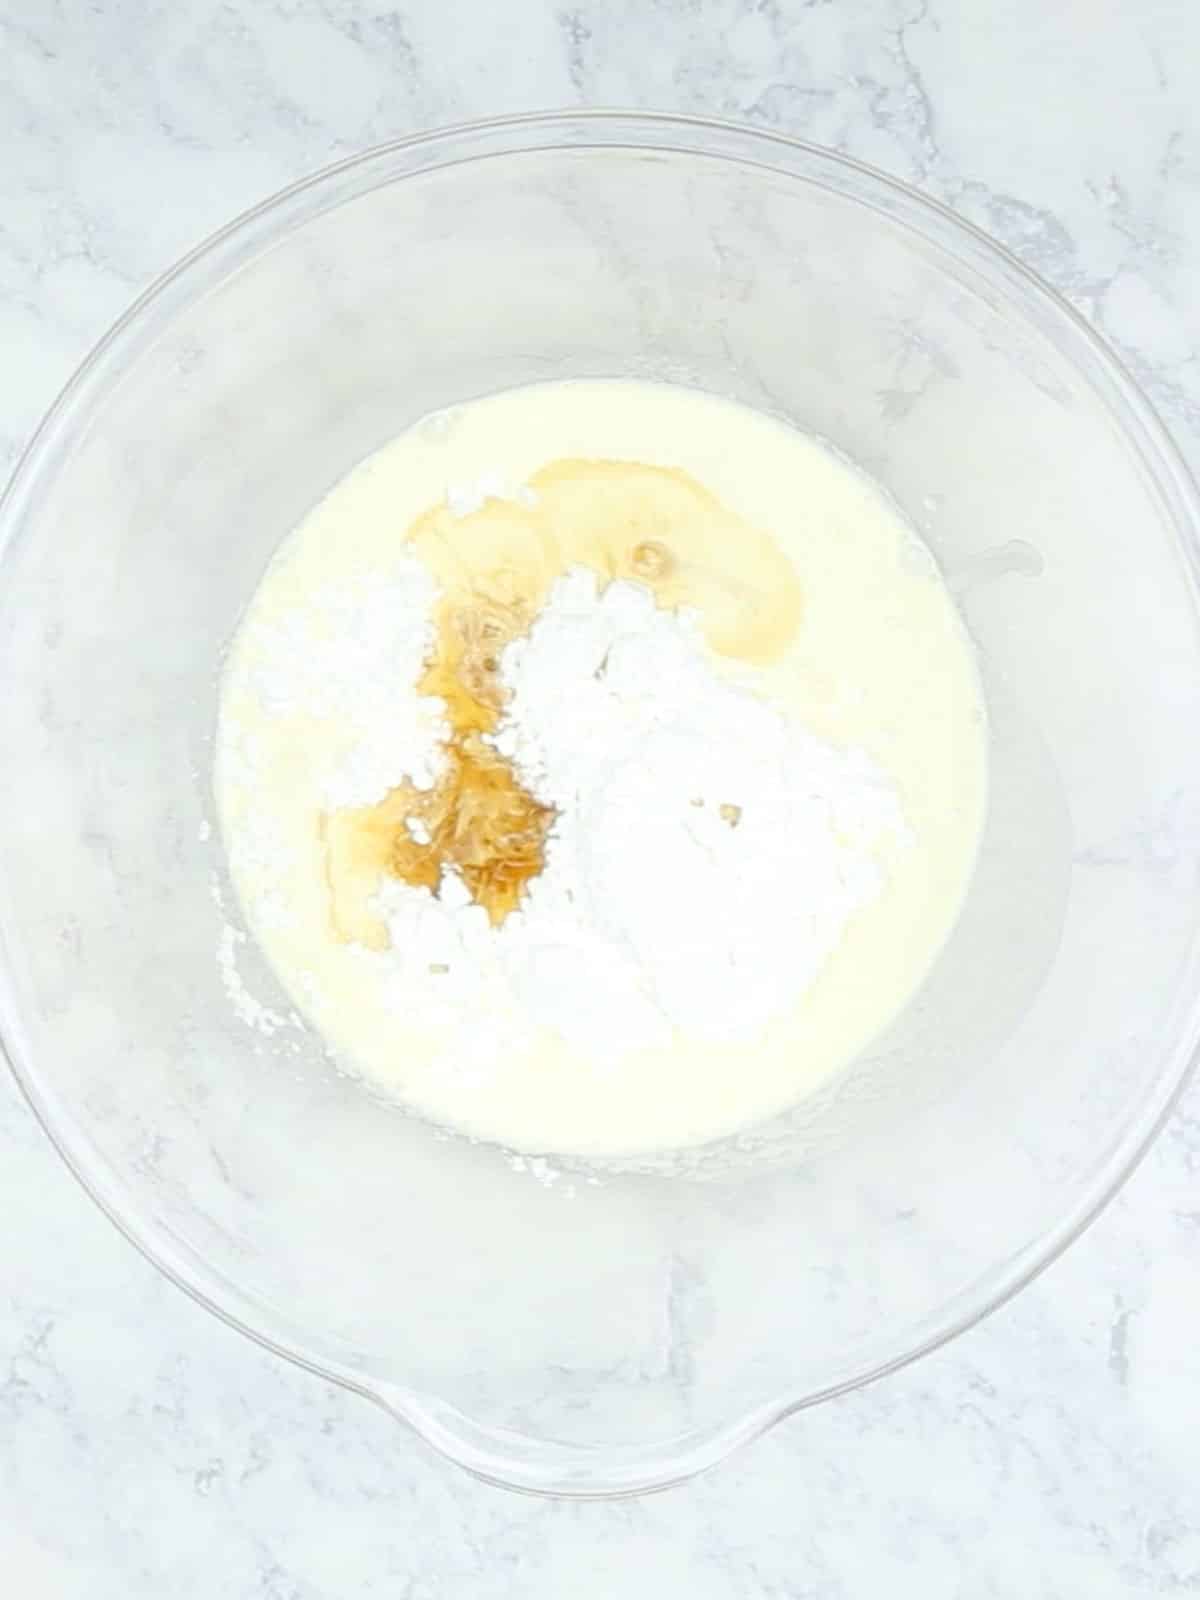 Whipped cream ingredients in a glass bowl.